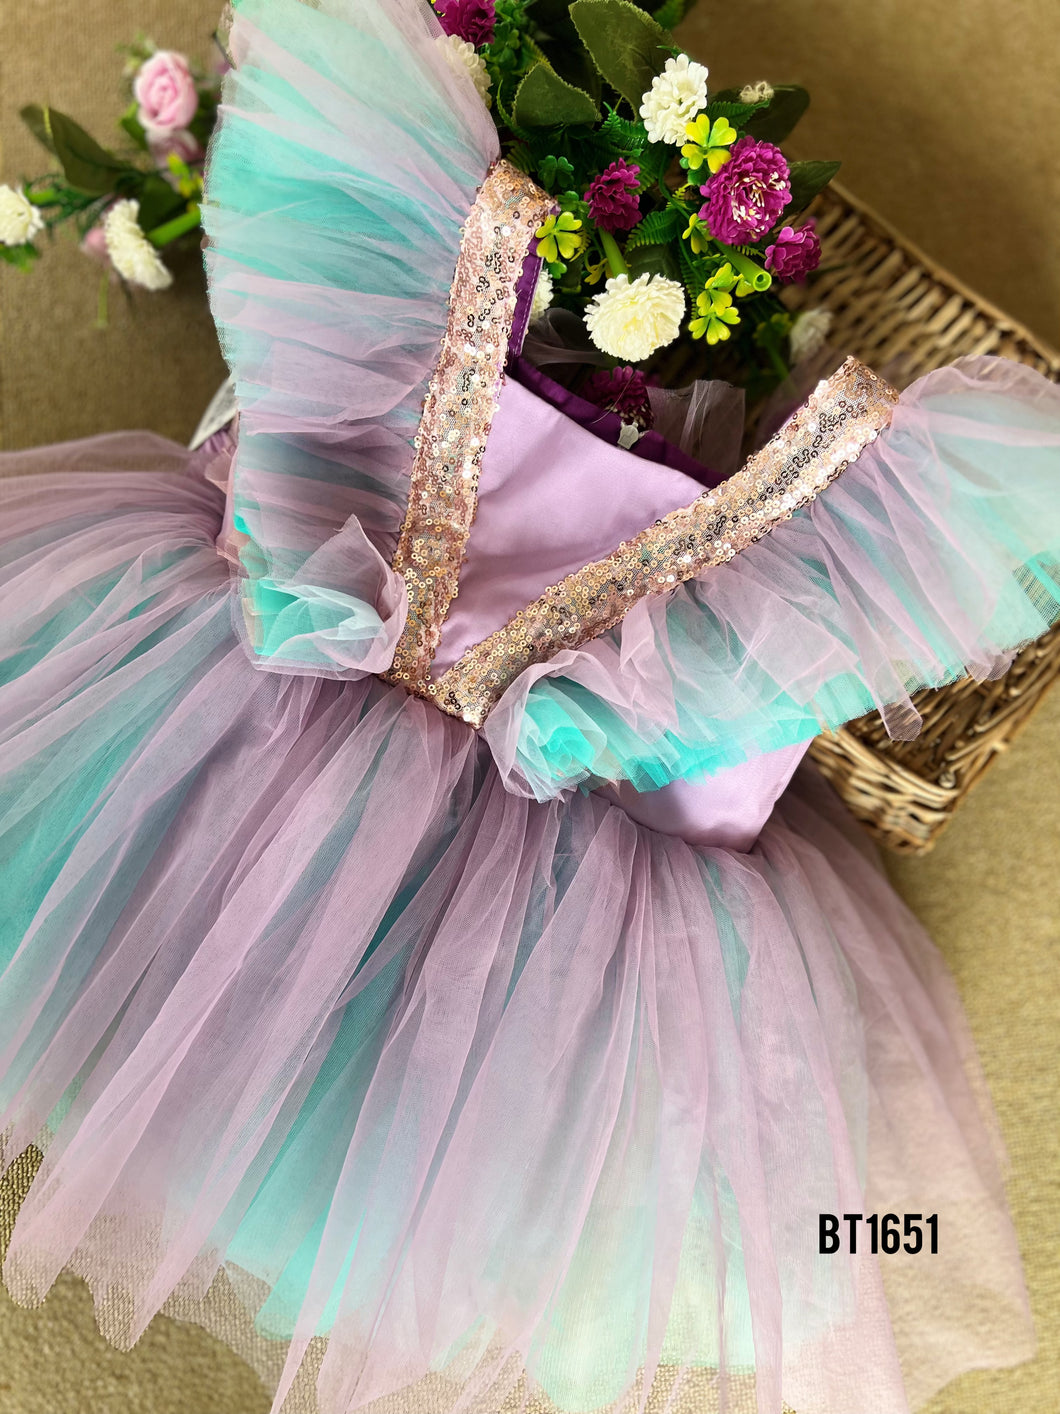 BT1651 Pastel Dream Dress - Your Little One's Perfect Party Outfit!